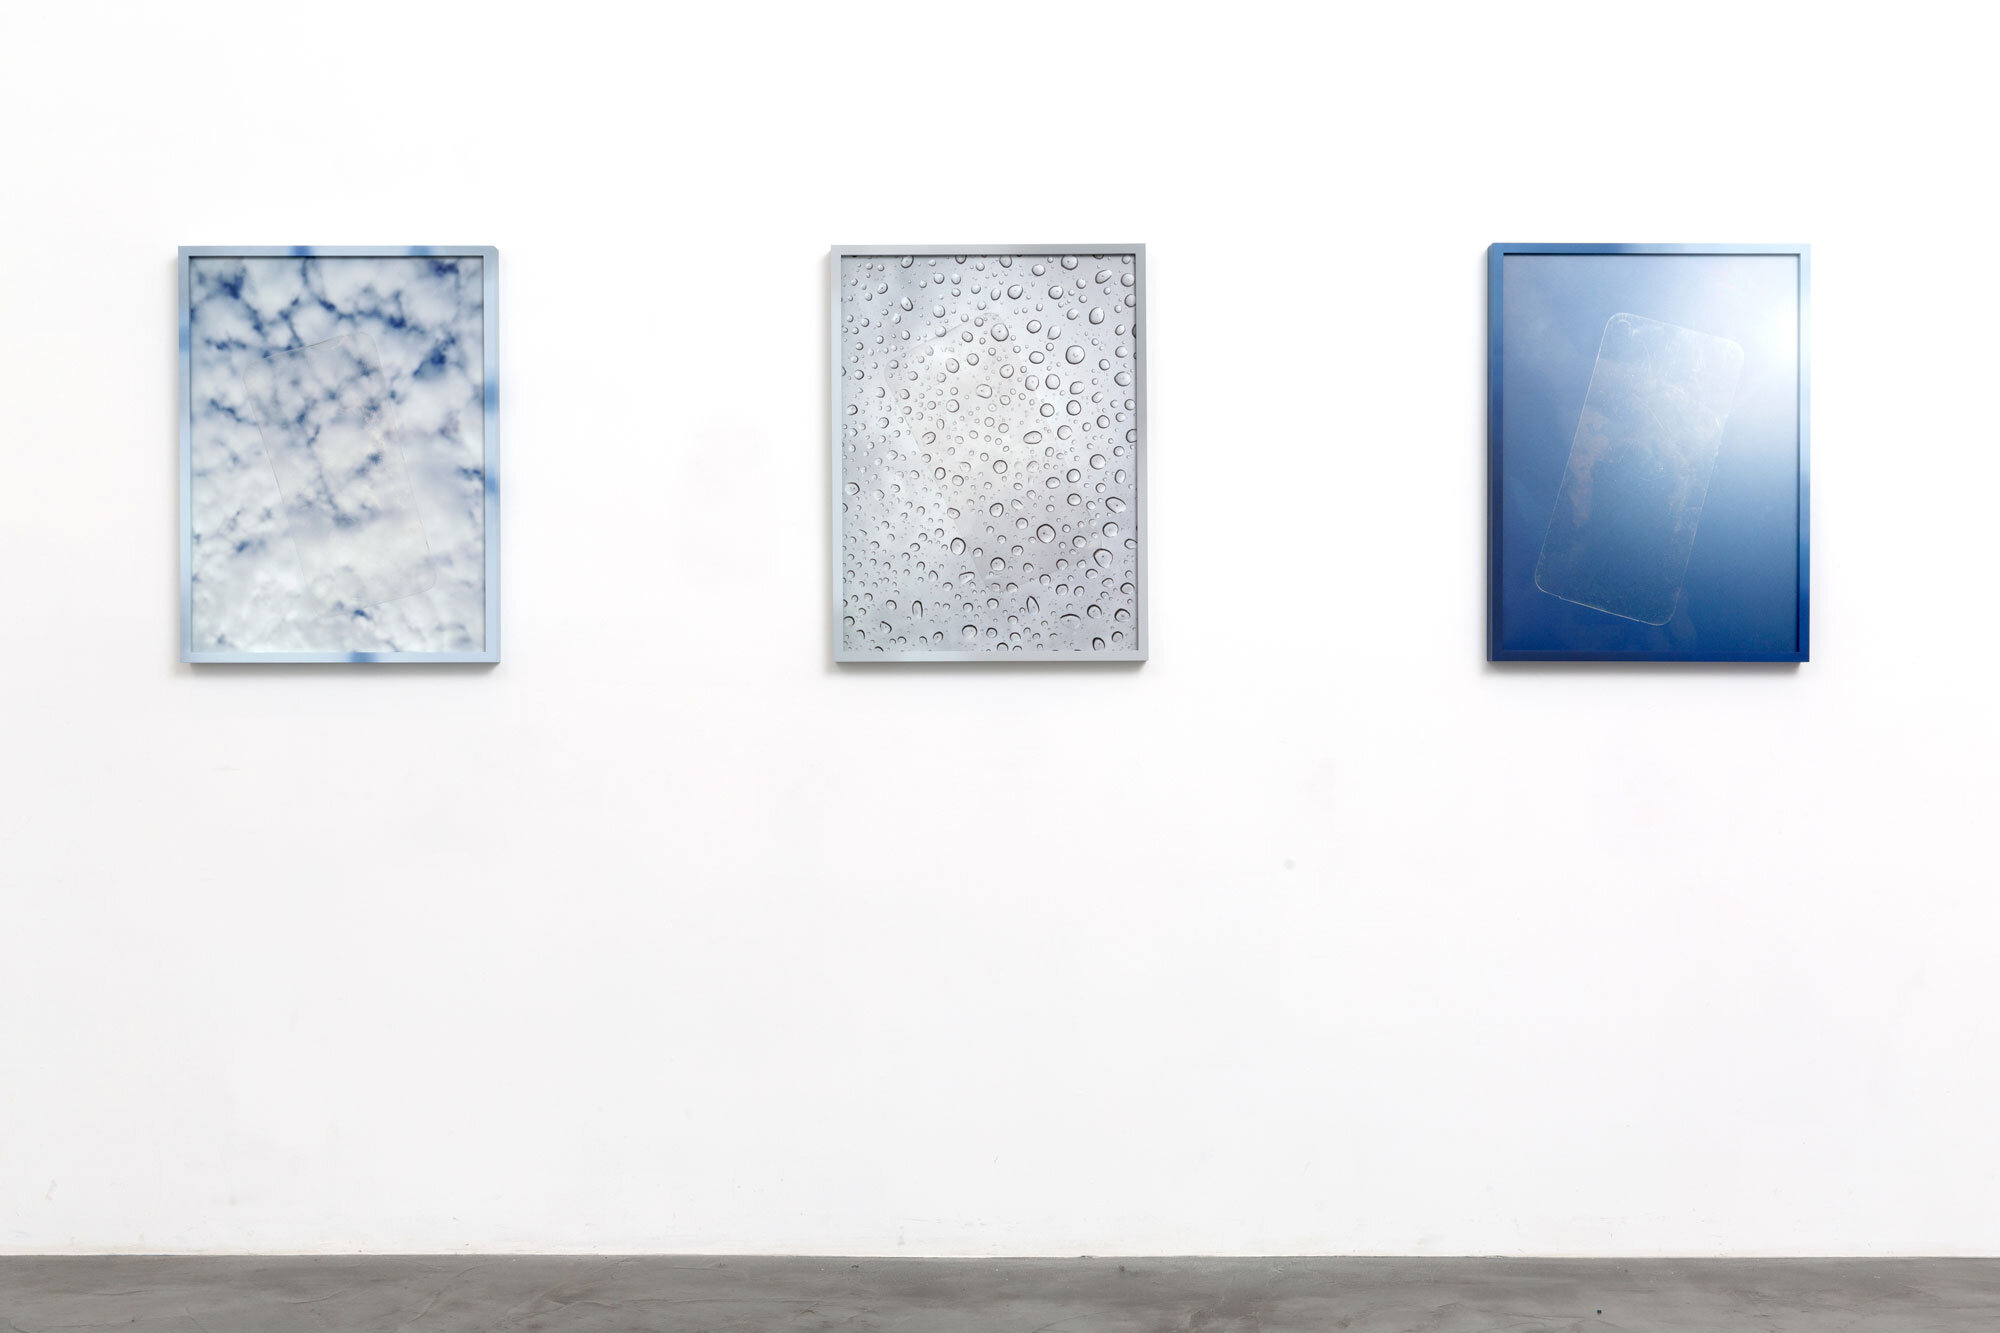  Valerie Green,  Look Up , In installation at CJG, March 2014 